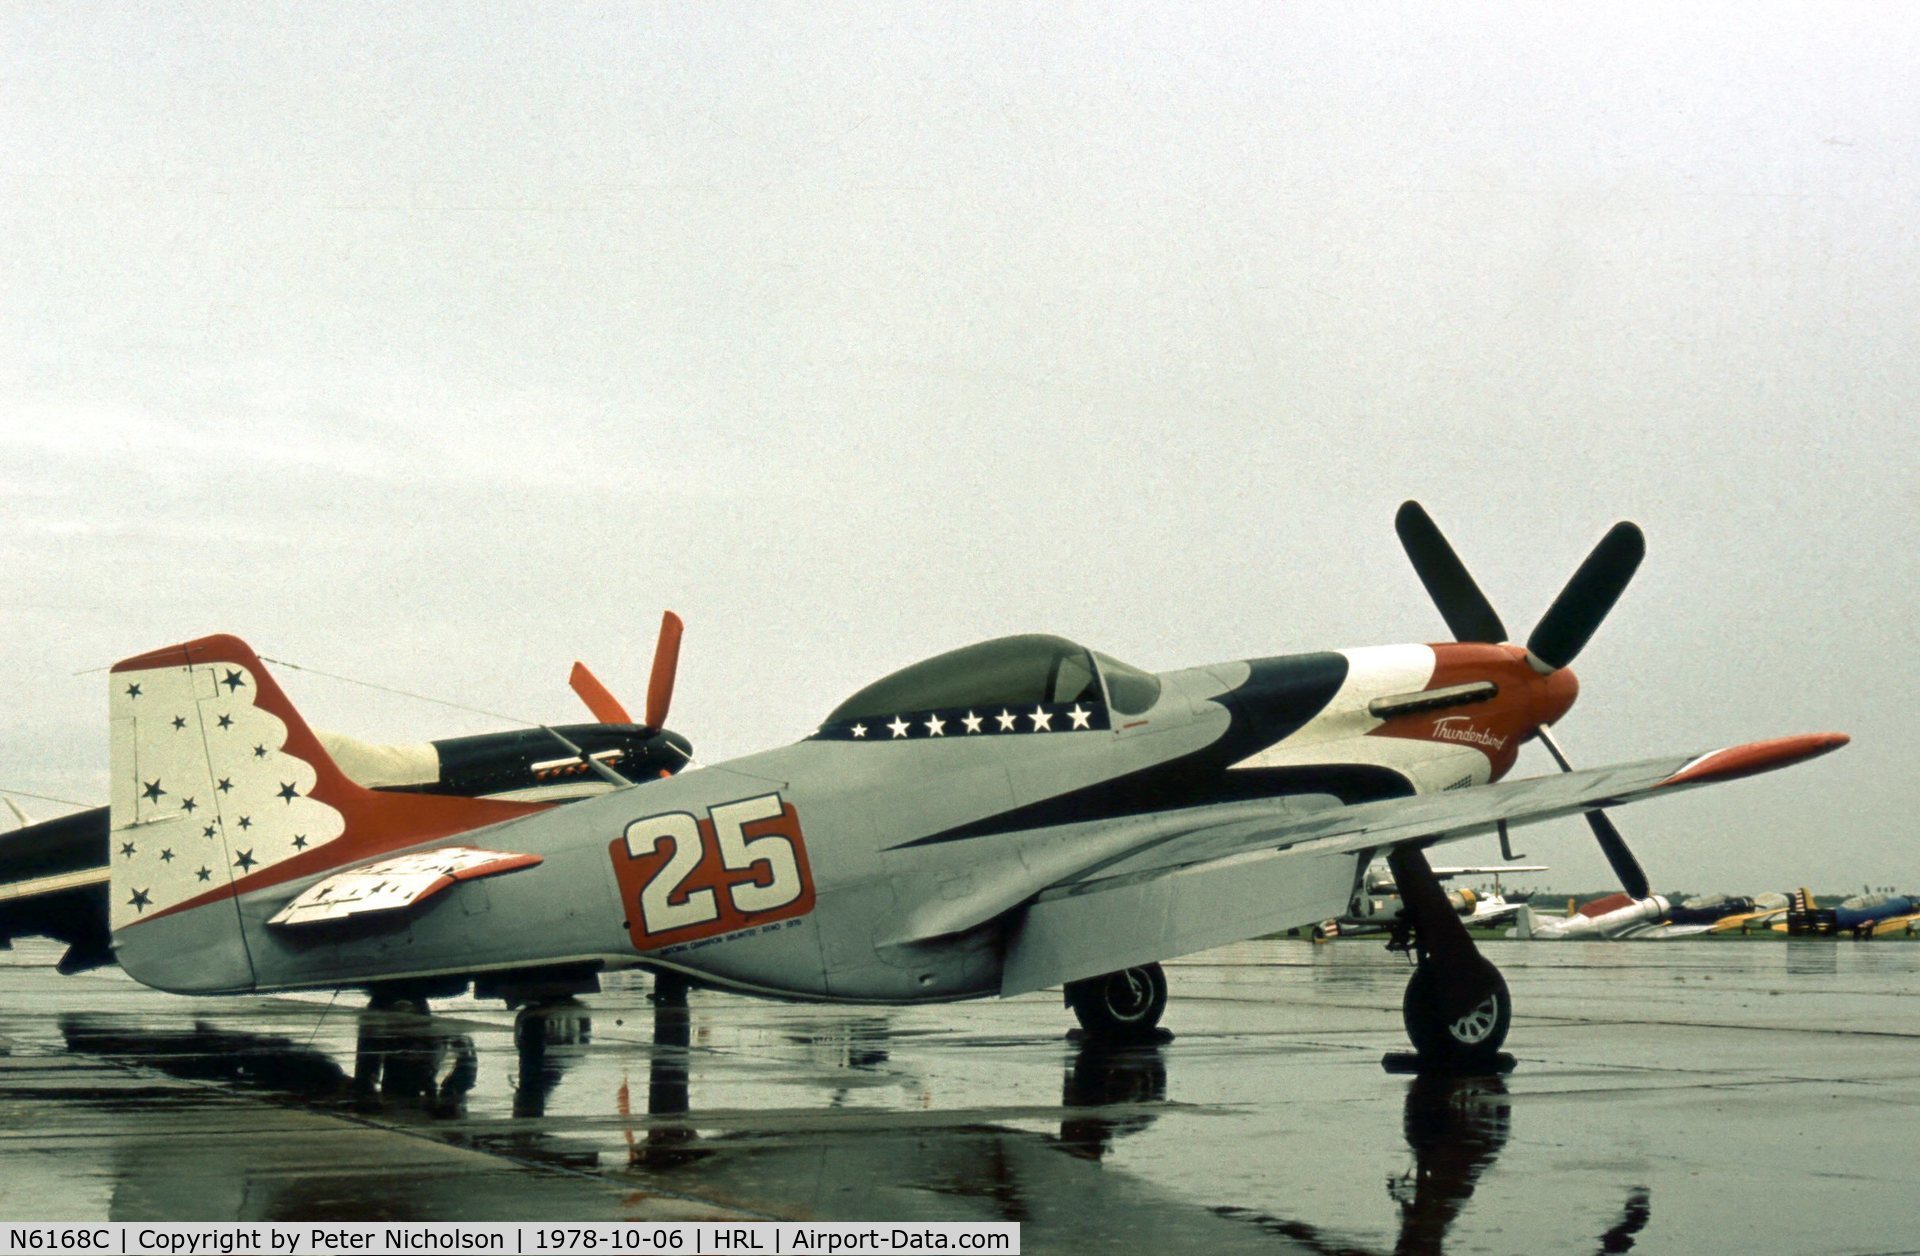 N6168C, 1944 North American P-51D Mustang C/N 44-73704, As NL6168C this Mustang was present at the 1978 Confederate Air Force Airshow at Harlingen.